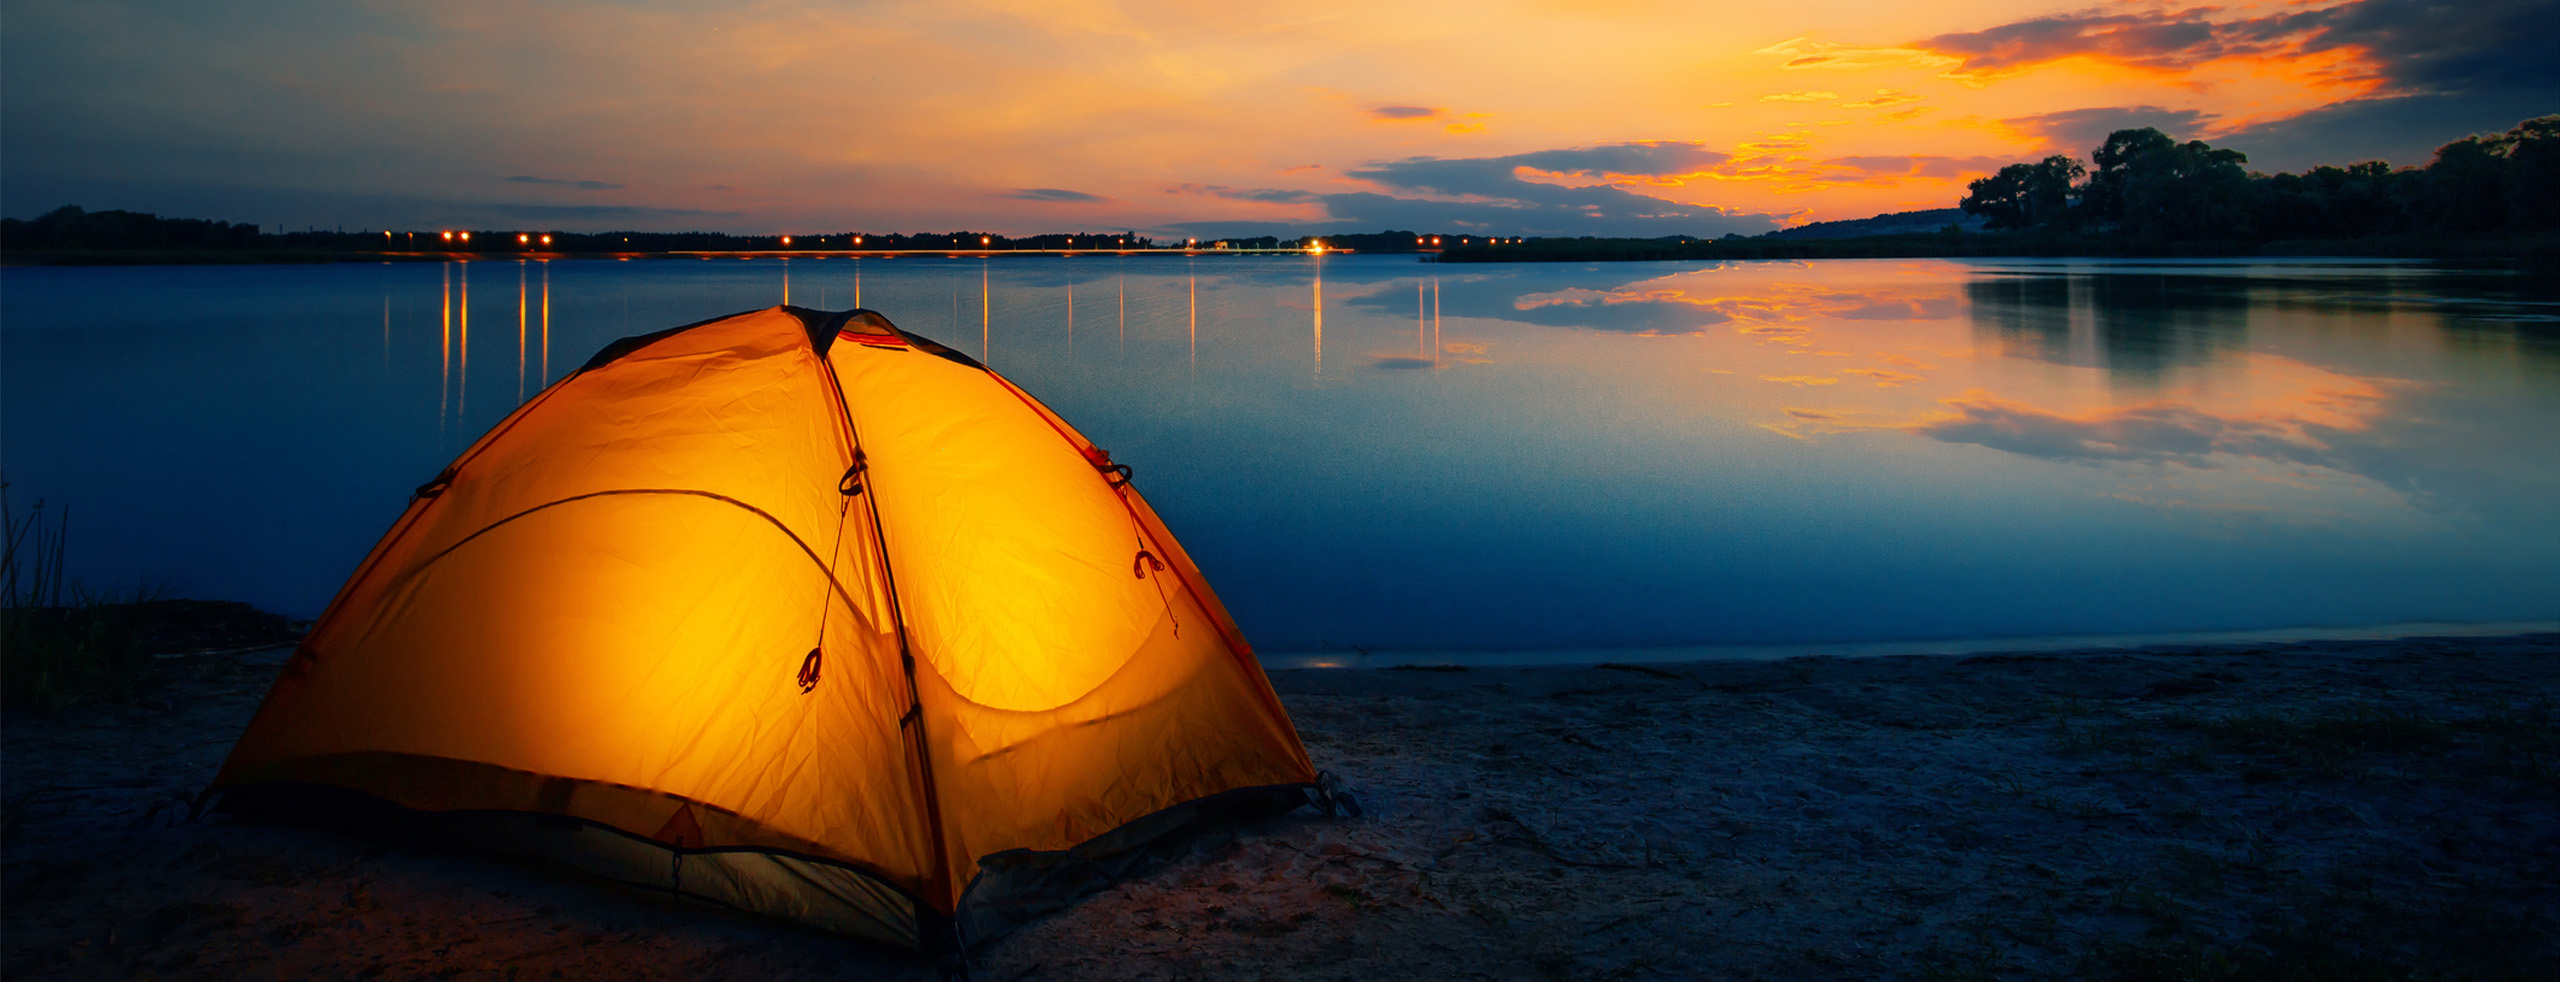 Tents on a beach in the evening.